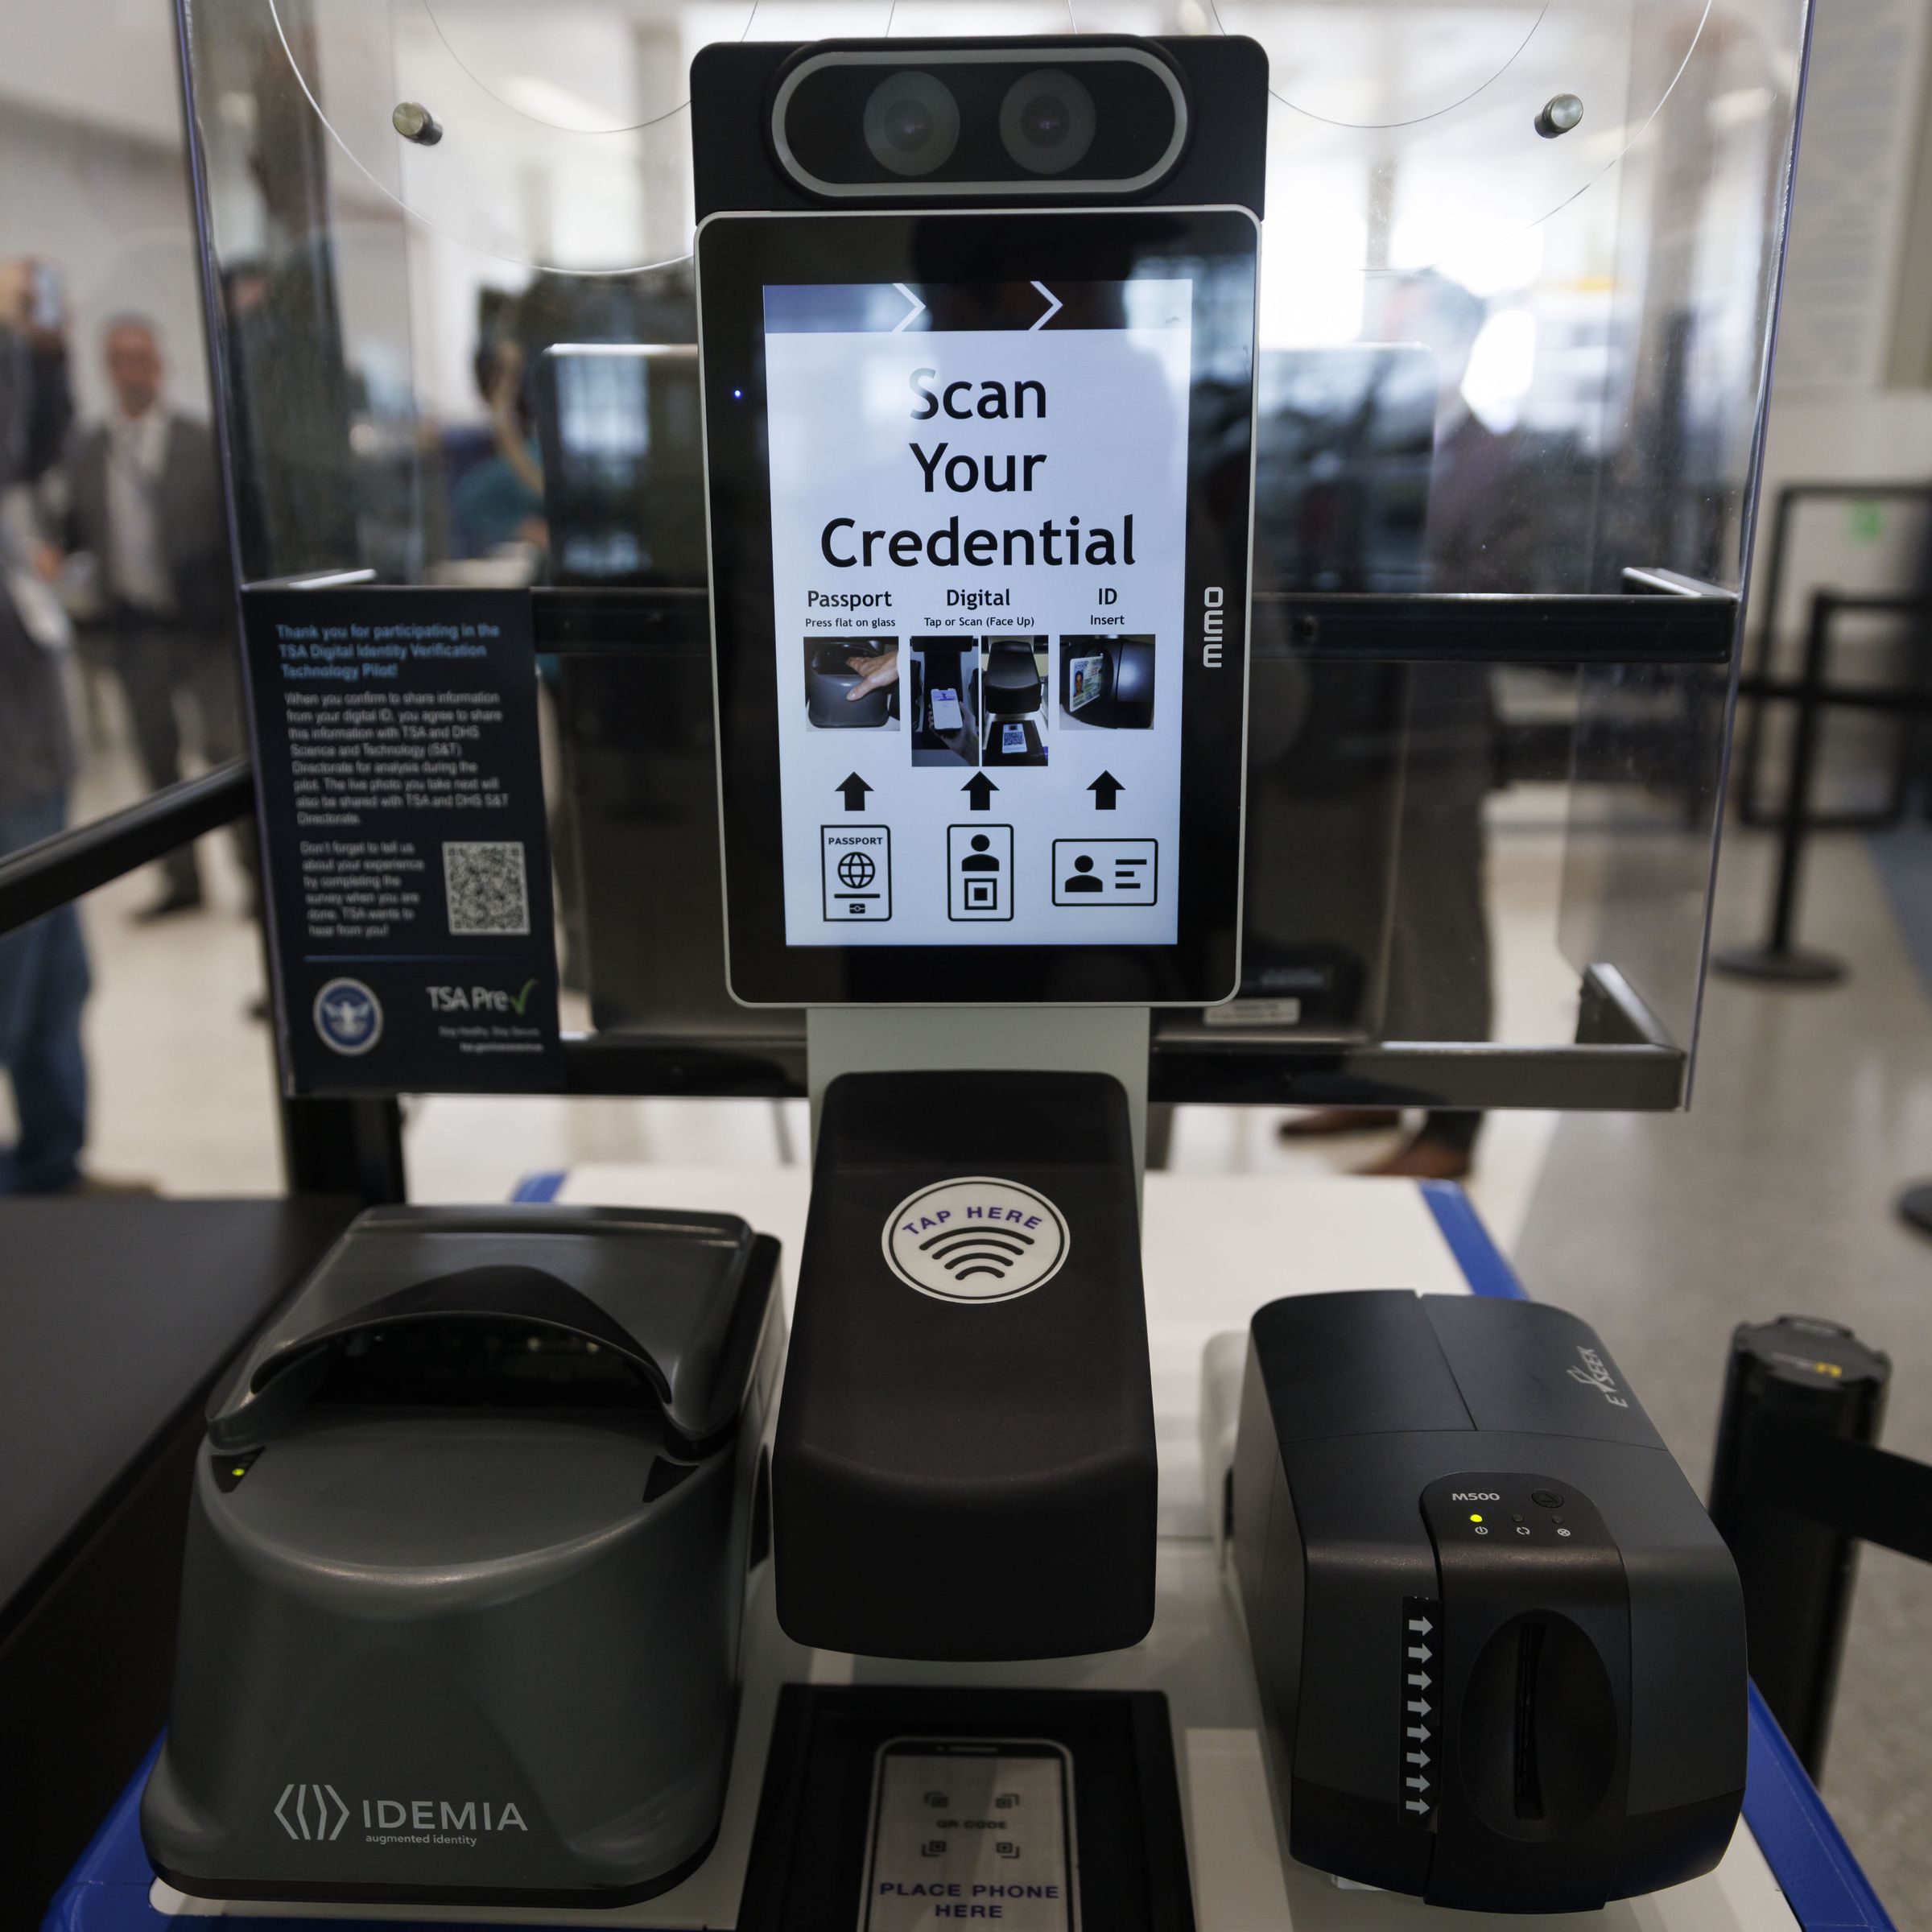 A Credential Authentication Technology (CAT-2) identity verification machine at a Transportation Security Administration (TSA) security checkpoint